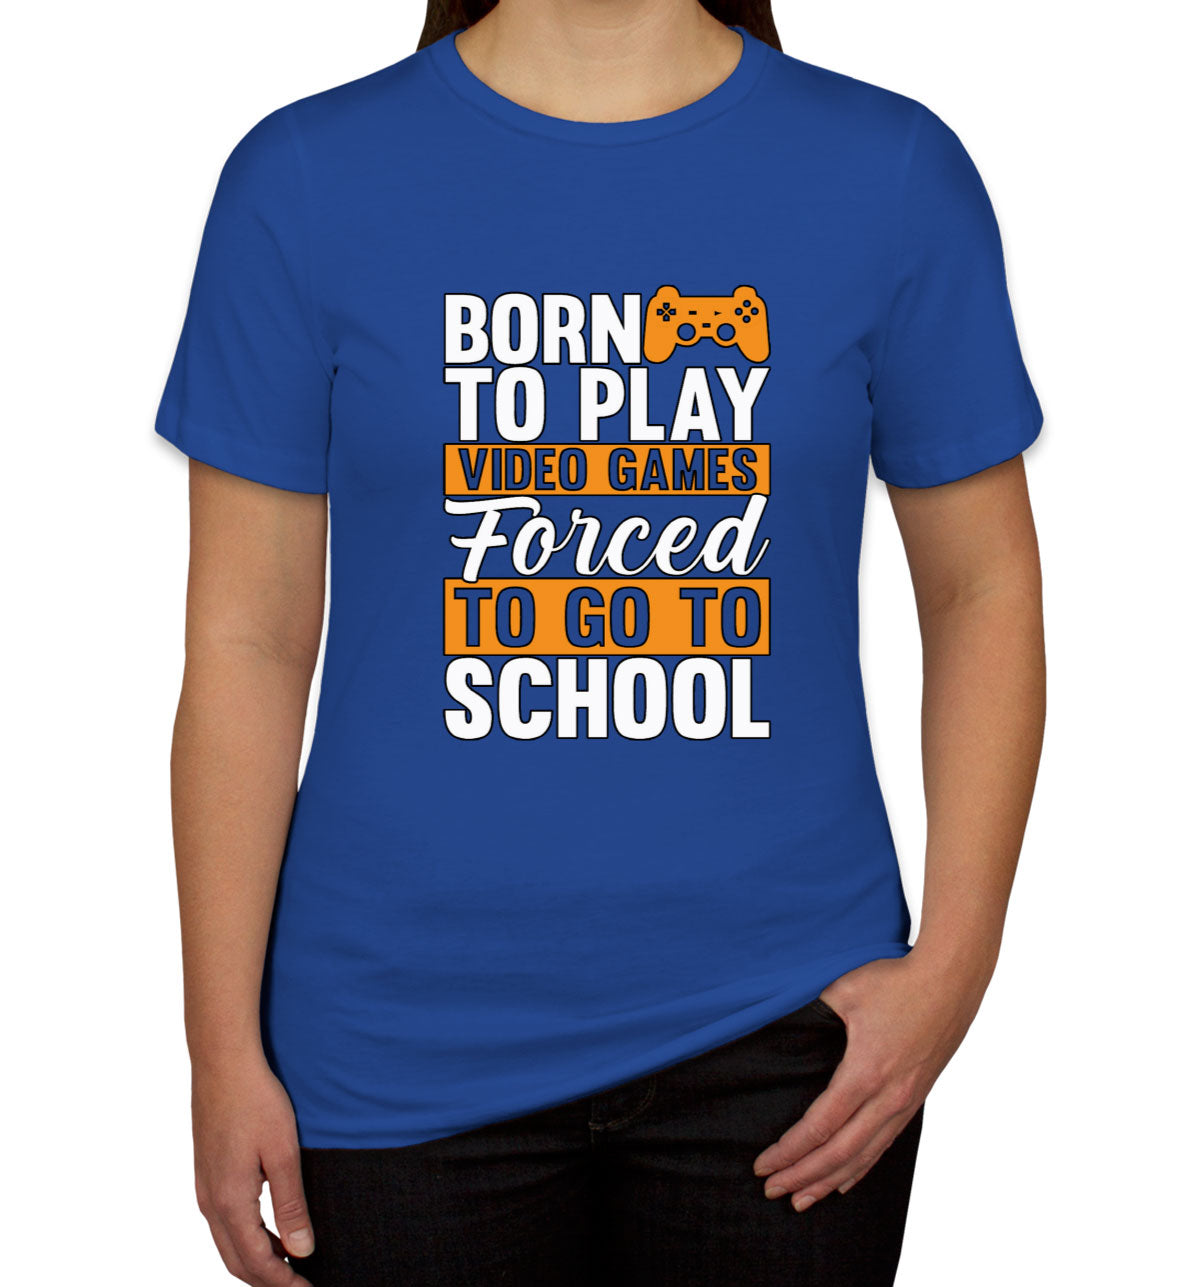 Born To Play Video Games Forced To Go To School Women's T-shirt